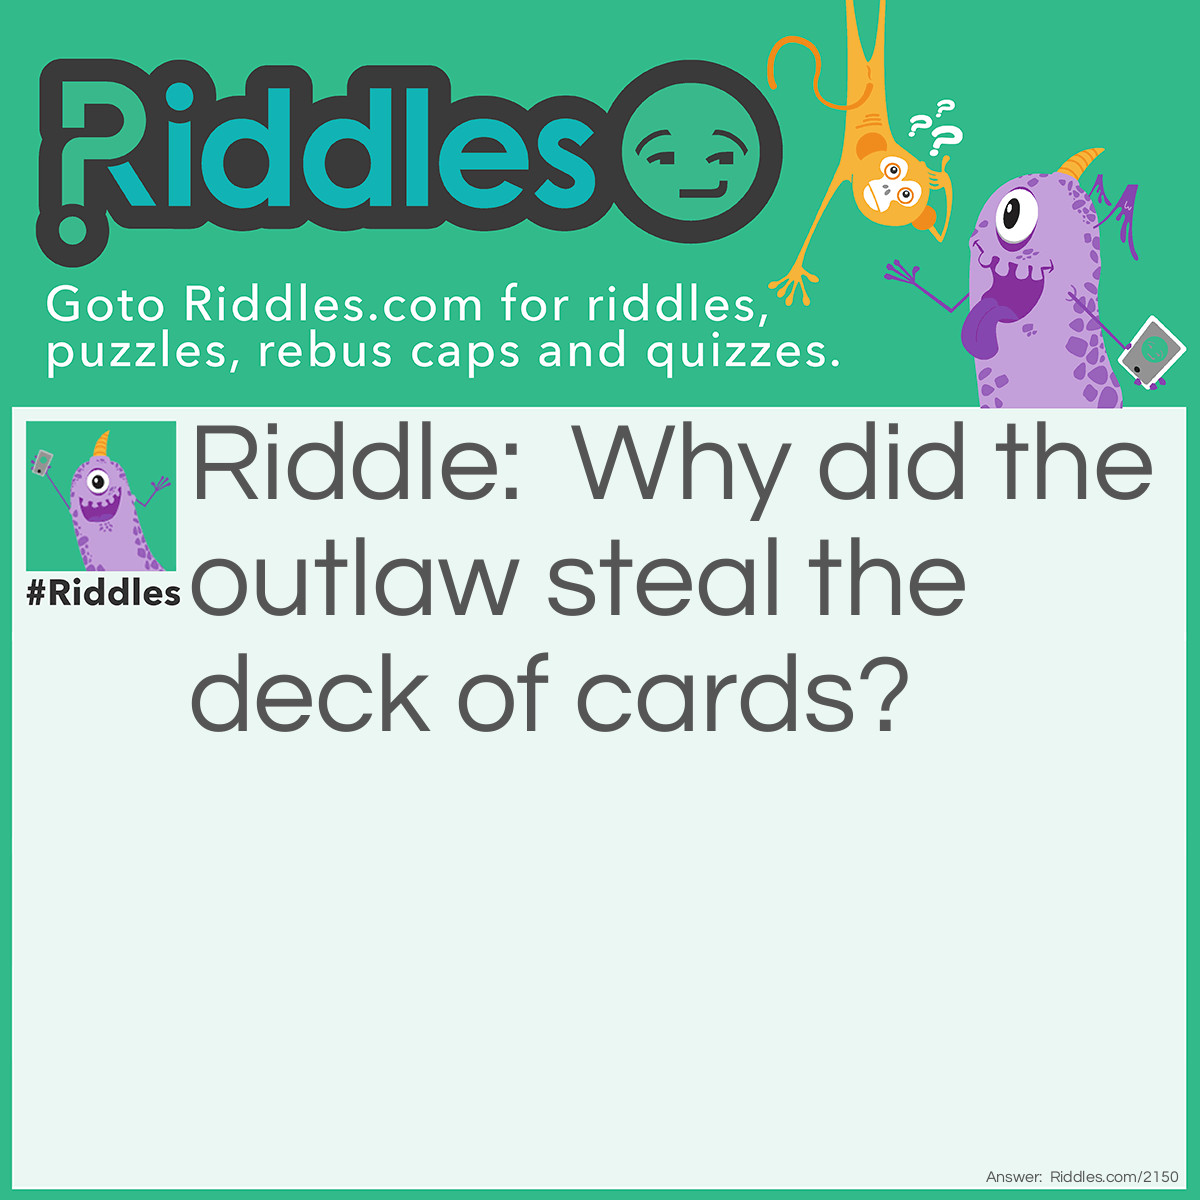 Riddle: Why did the outlaw steal the deck of cards? Answer: He heard there were 13 diamonds in it.